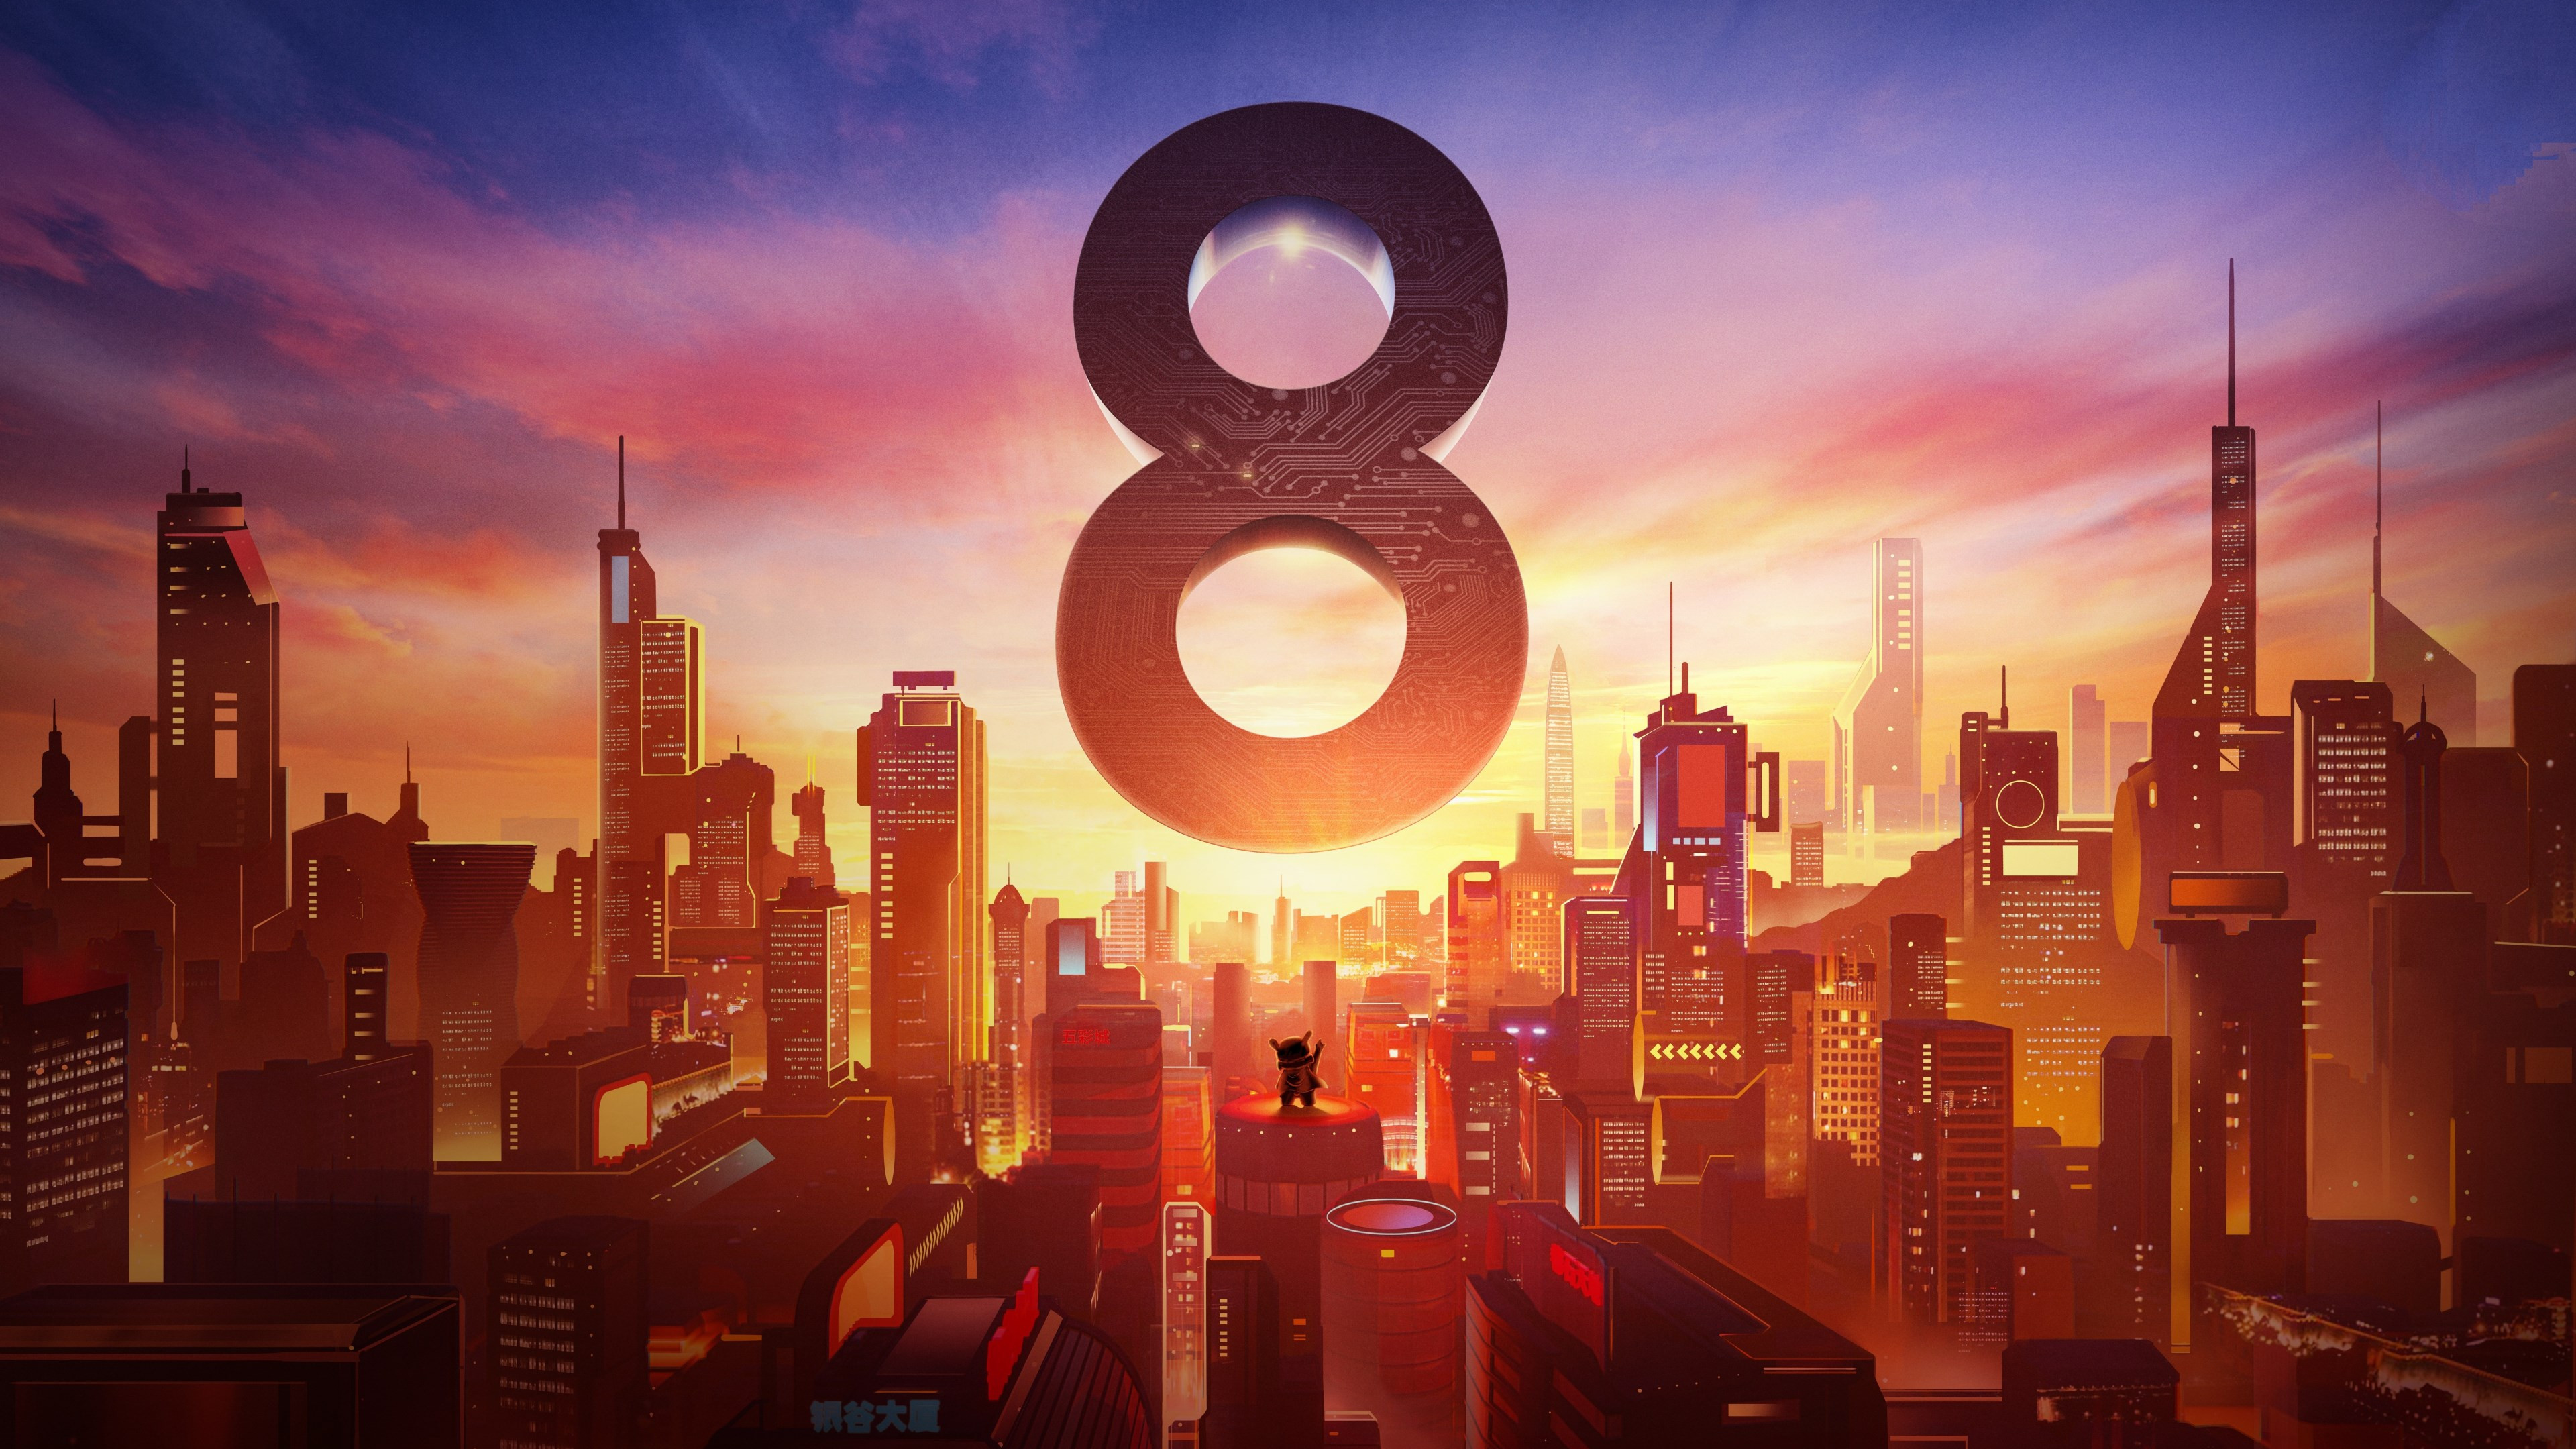 Xiaomi Mi 8. Poster from the launch event wallpaper 3840x2160